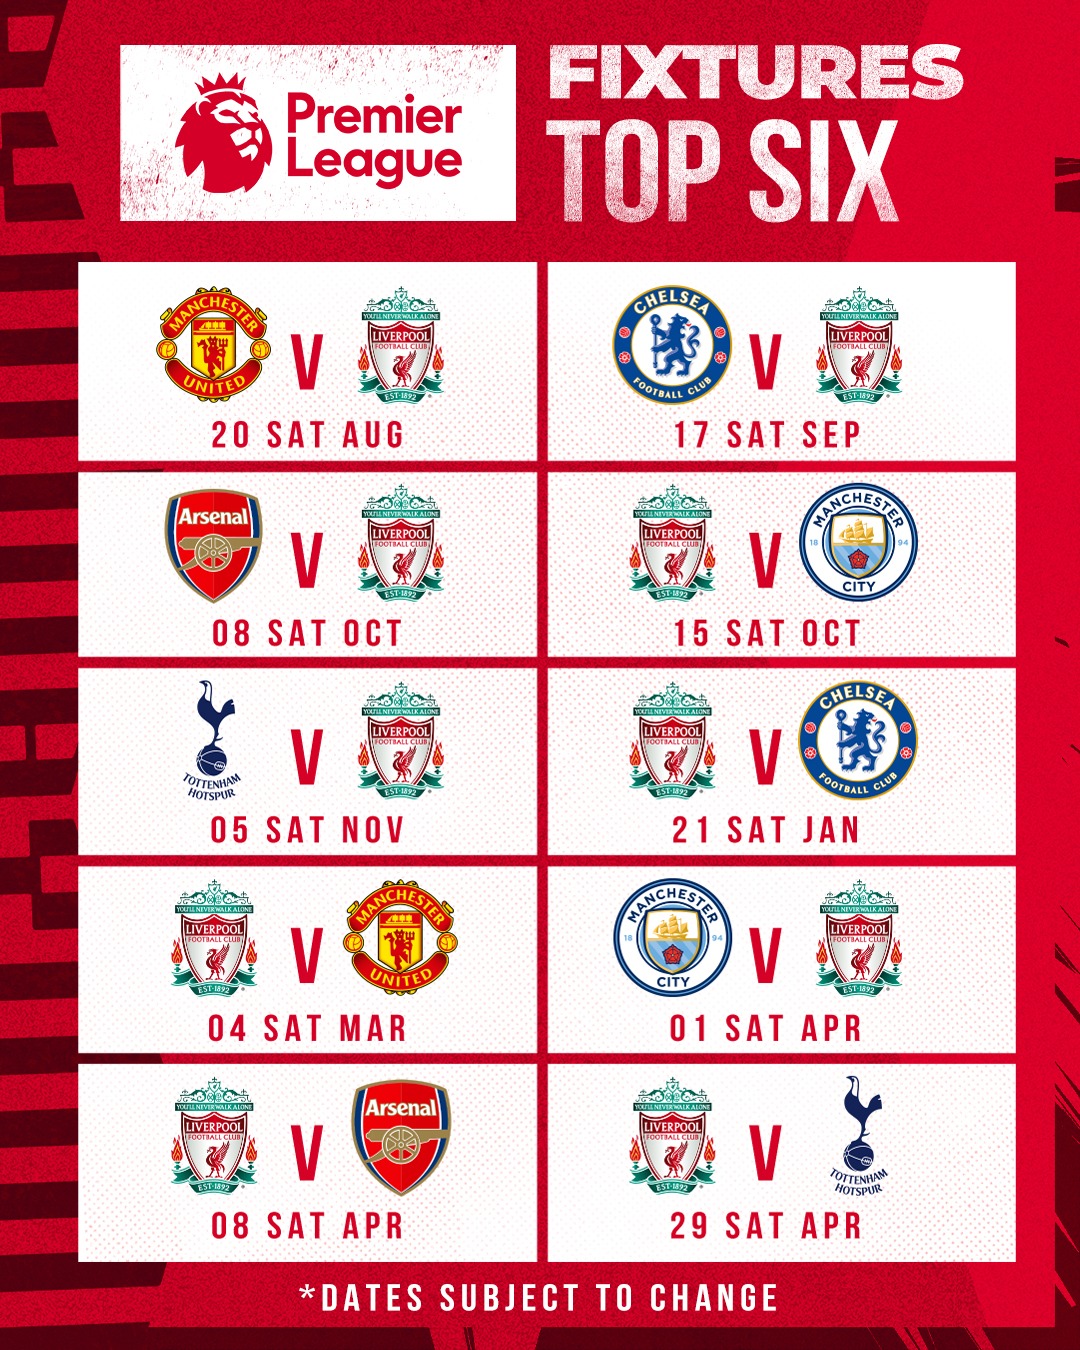 liverpool-fc-on-twitter-when-we-ll-face-last-season-s-top-6